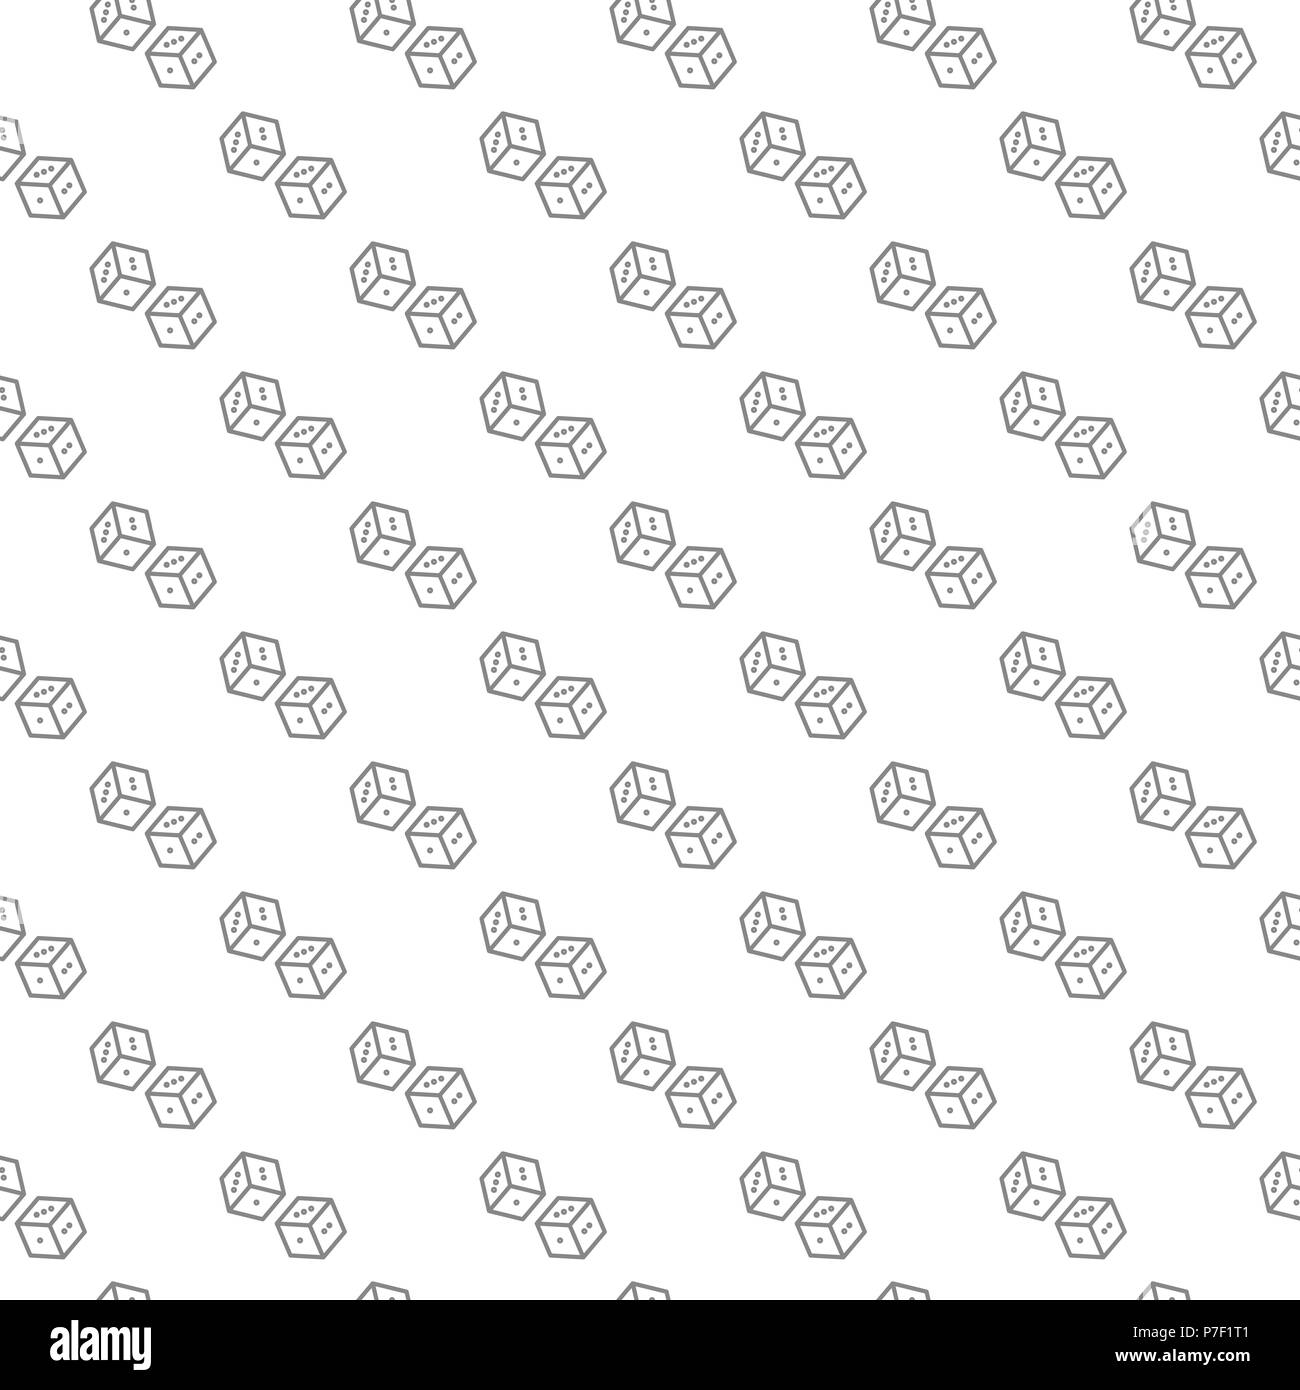 Simple dice seamless pattern with various icons and symbols on white background flat vector illustration Stock Vector